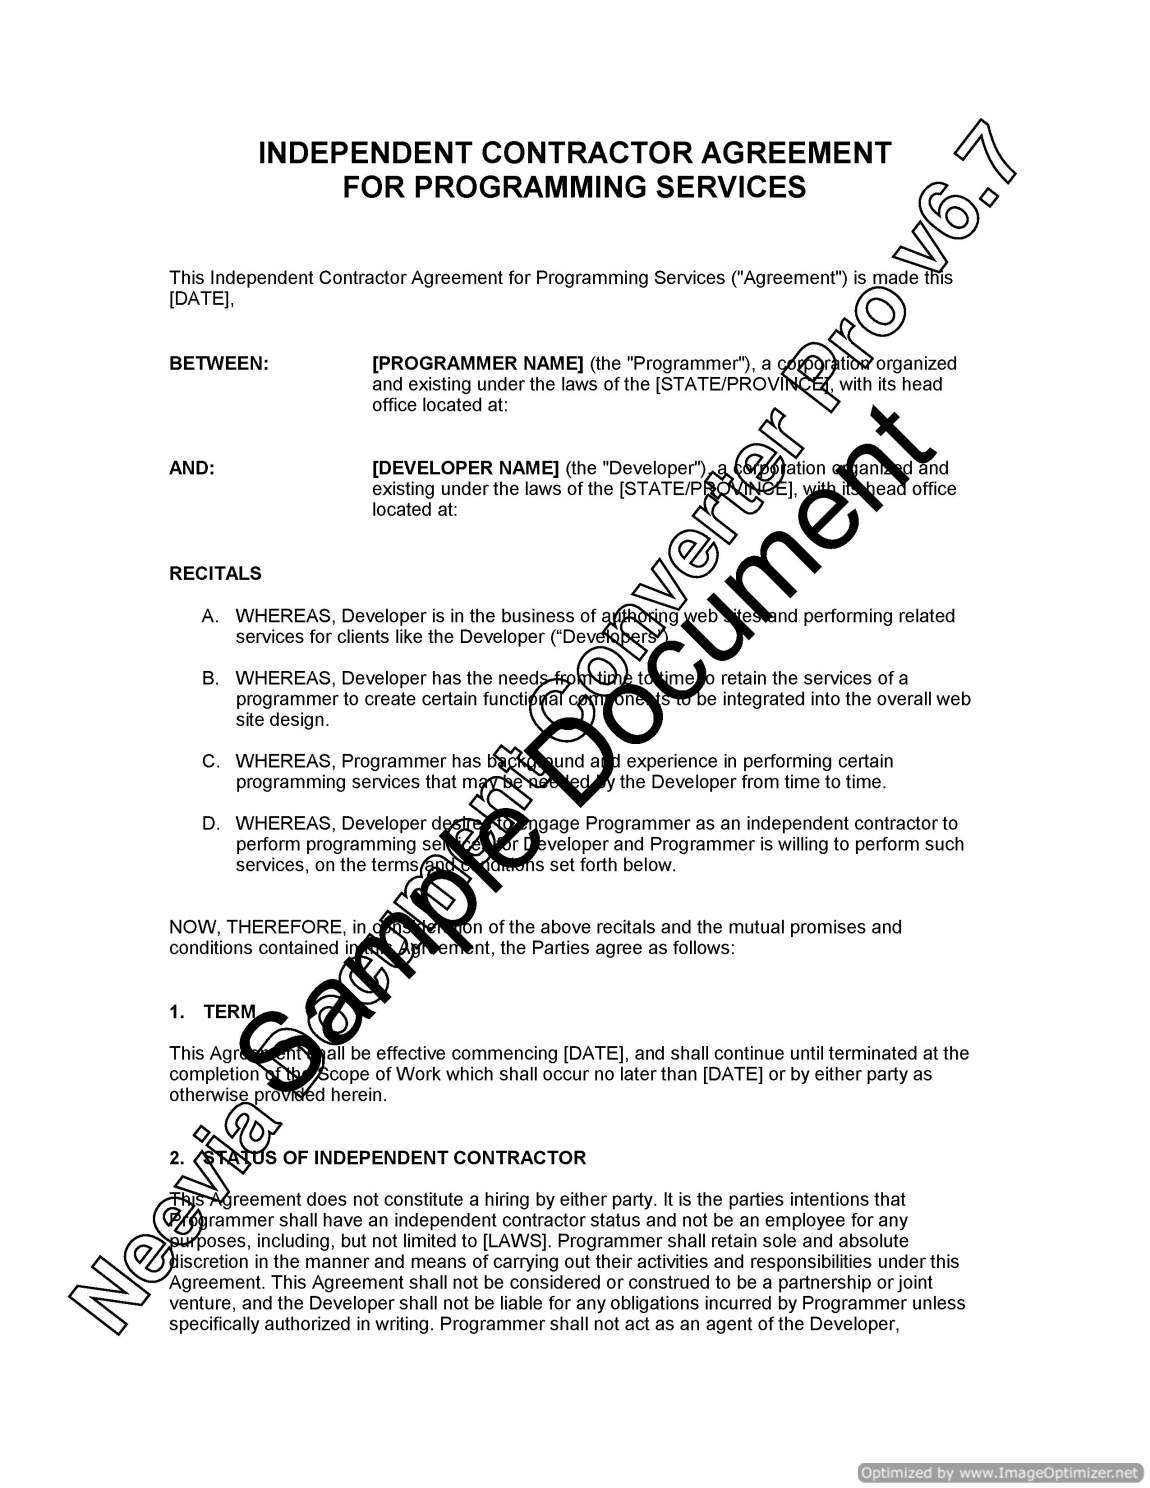 Independent Contractor Agreement For Programming Services Lawyer